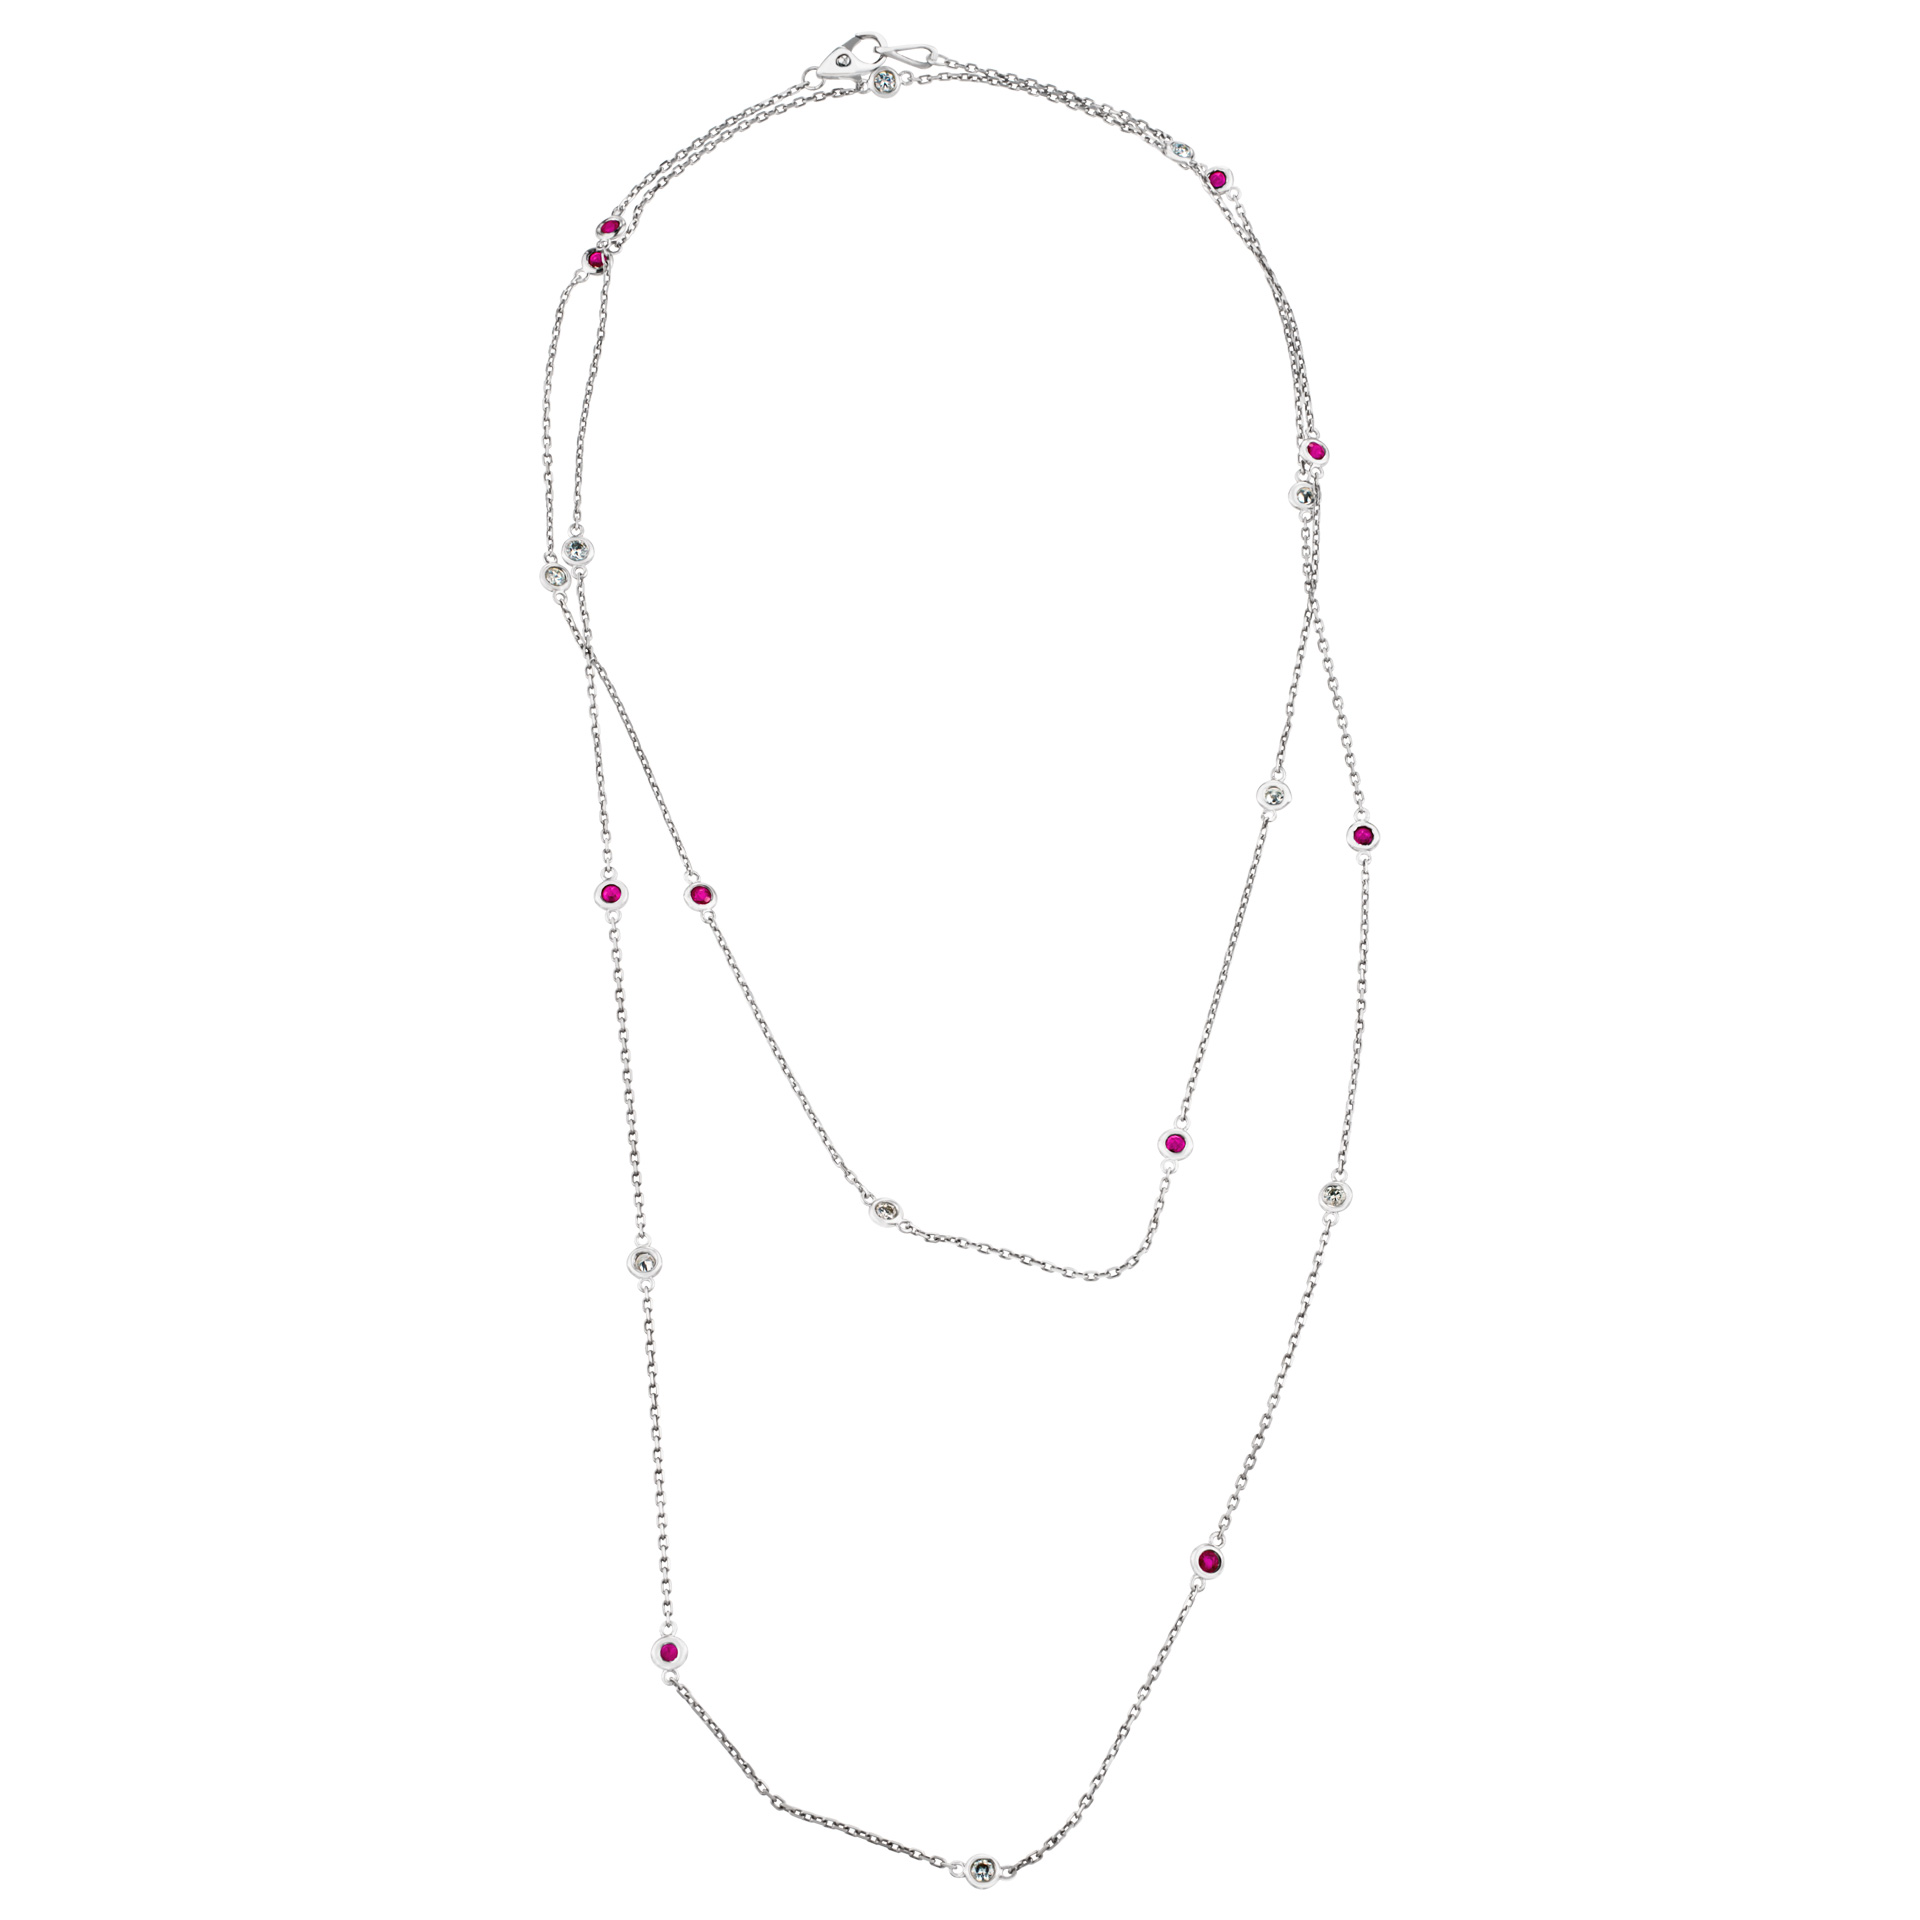 Diamonds and rubies by the yard necklace in14K white gold image 1